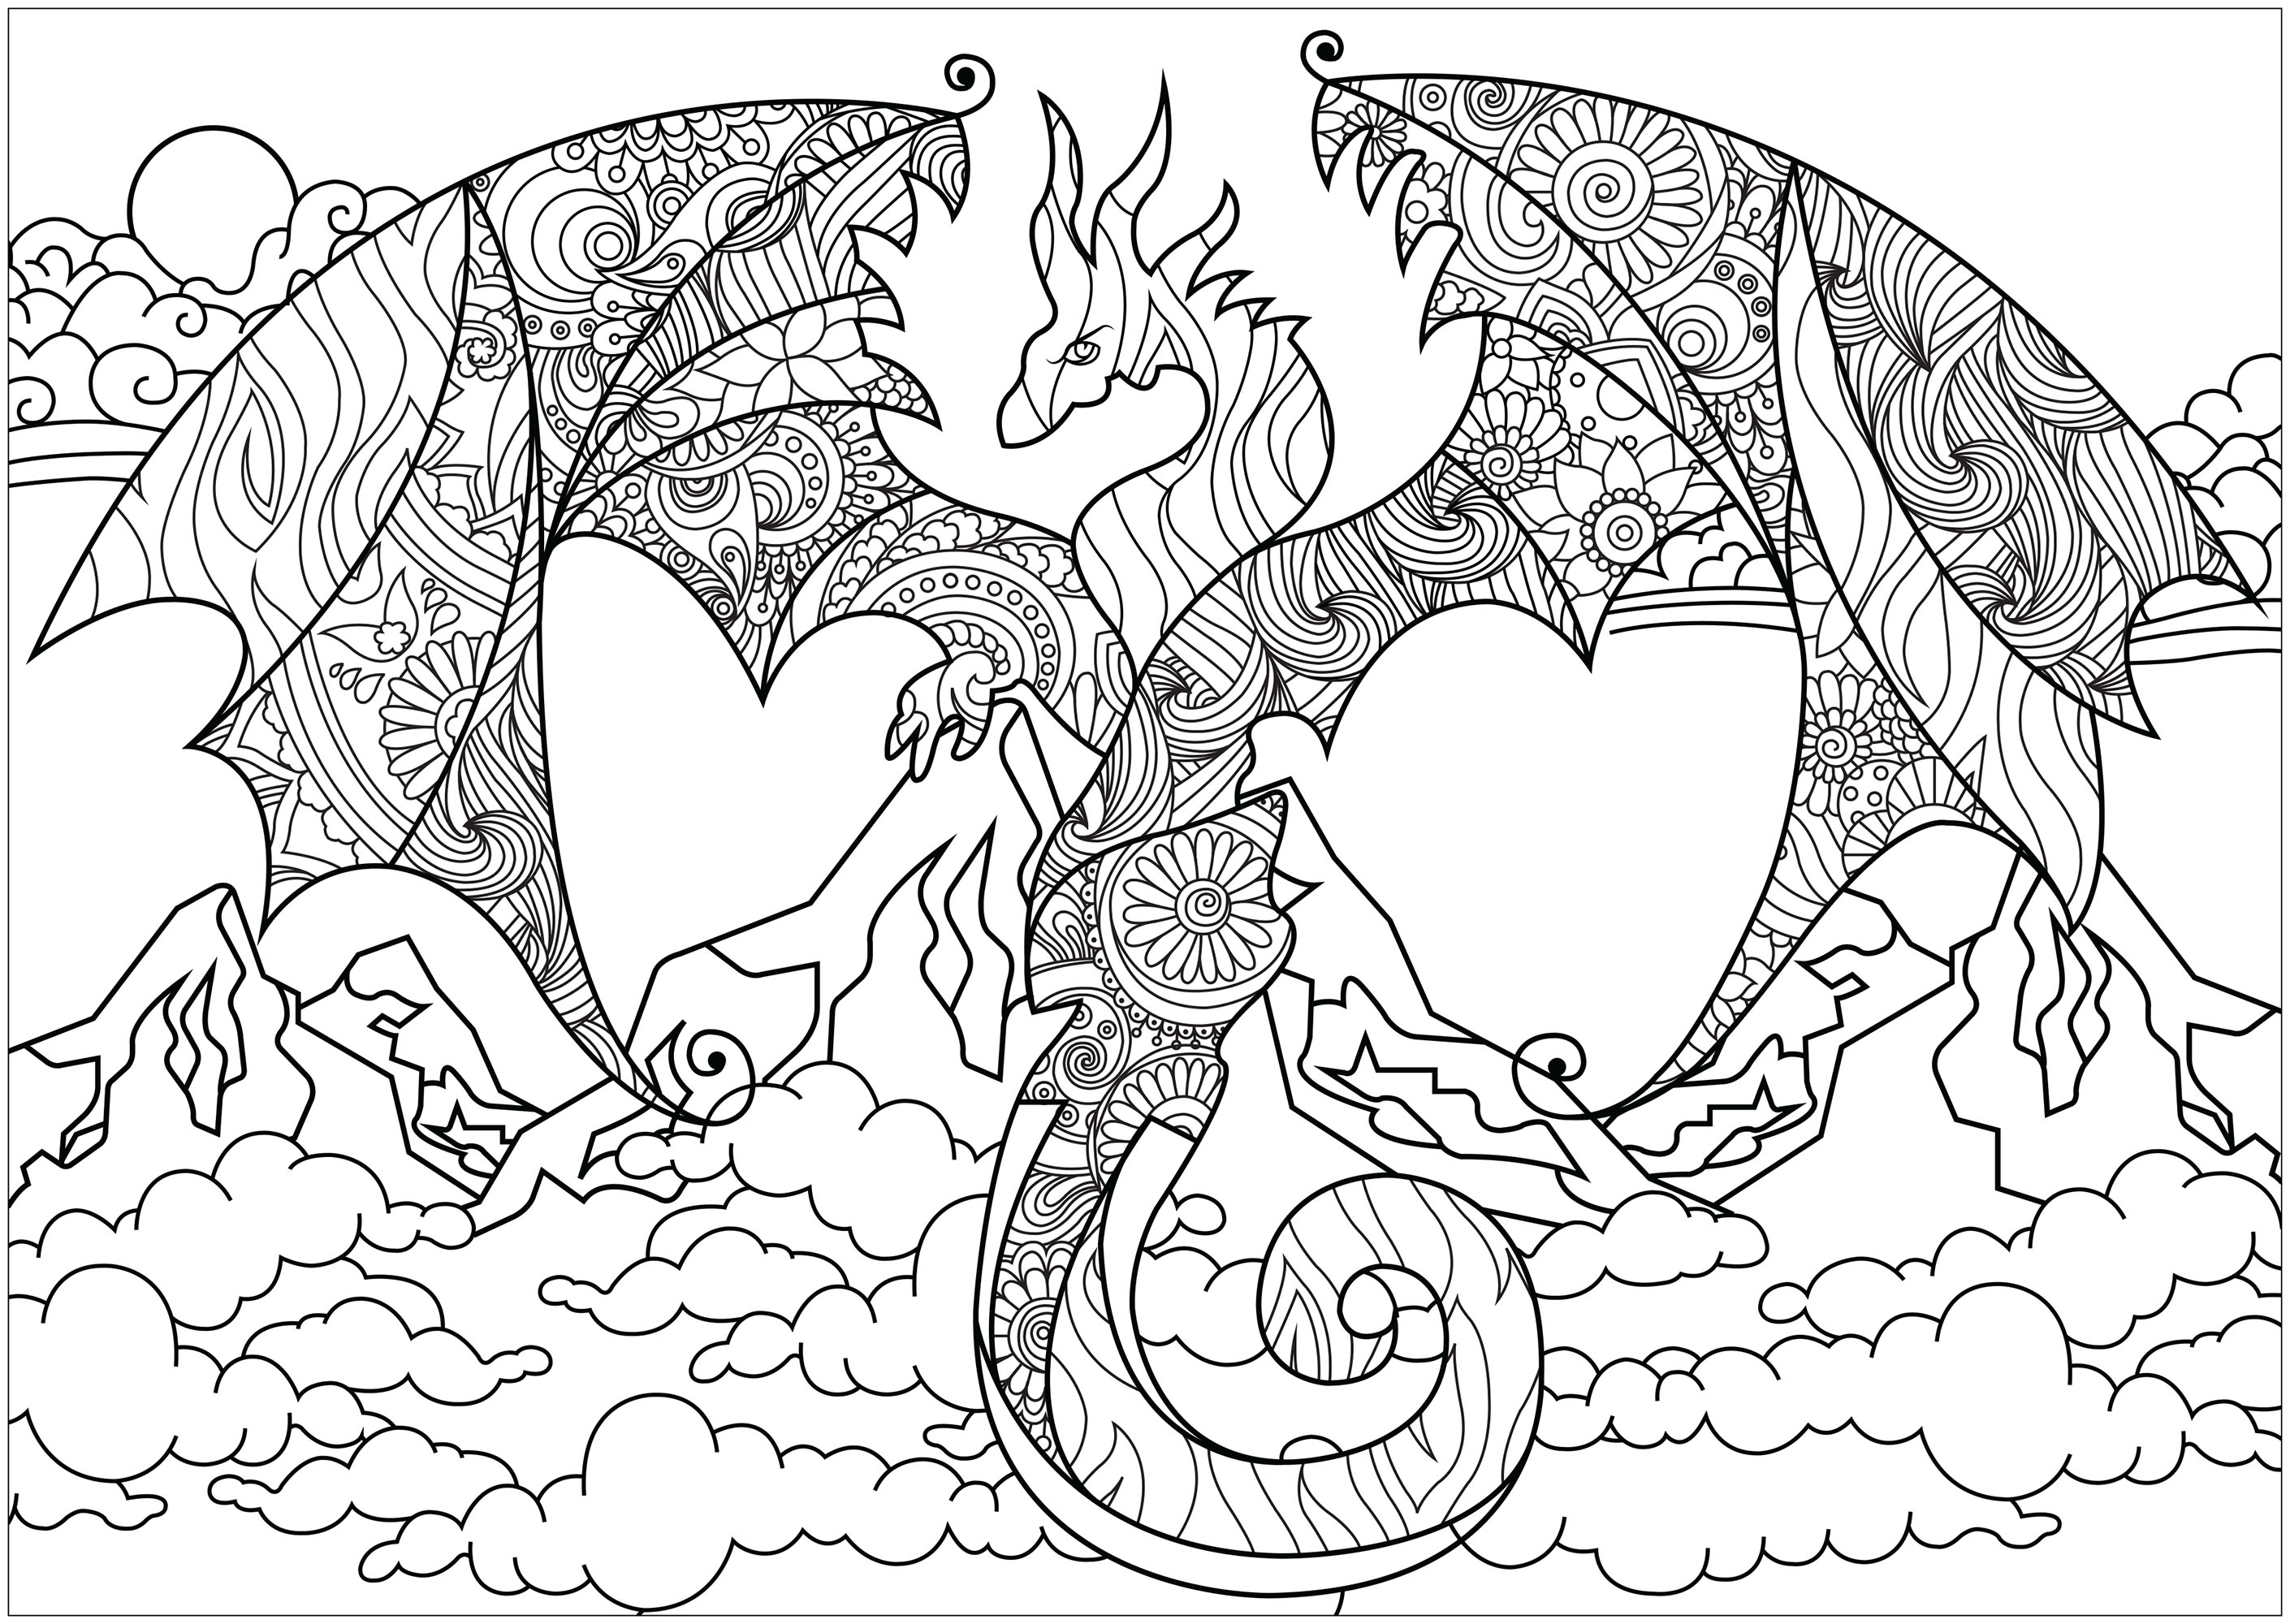 Dragon of the mountains - Lucie Coloring Pages for Adults - Just Color.